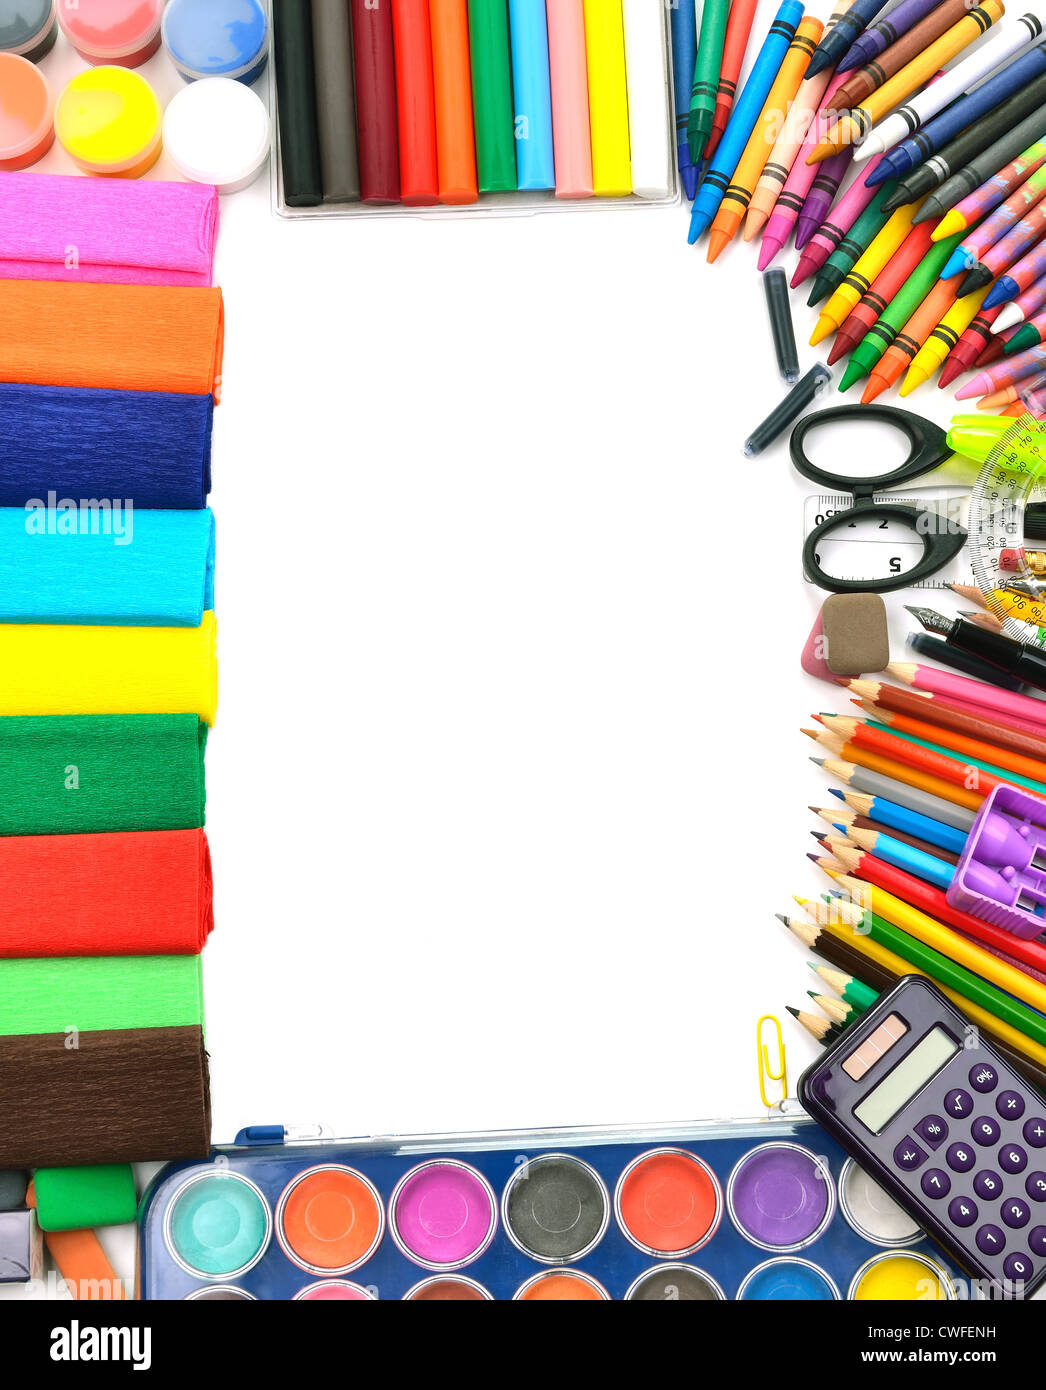 School and office supplies frame, on white background, back to school Stock Photo